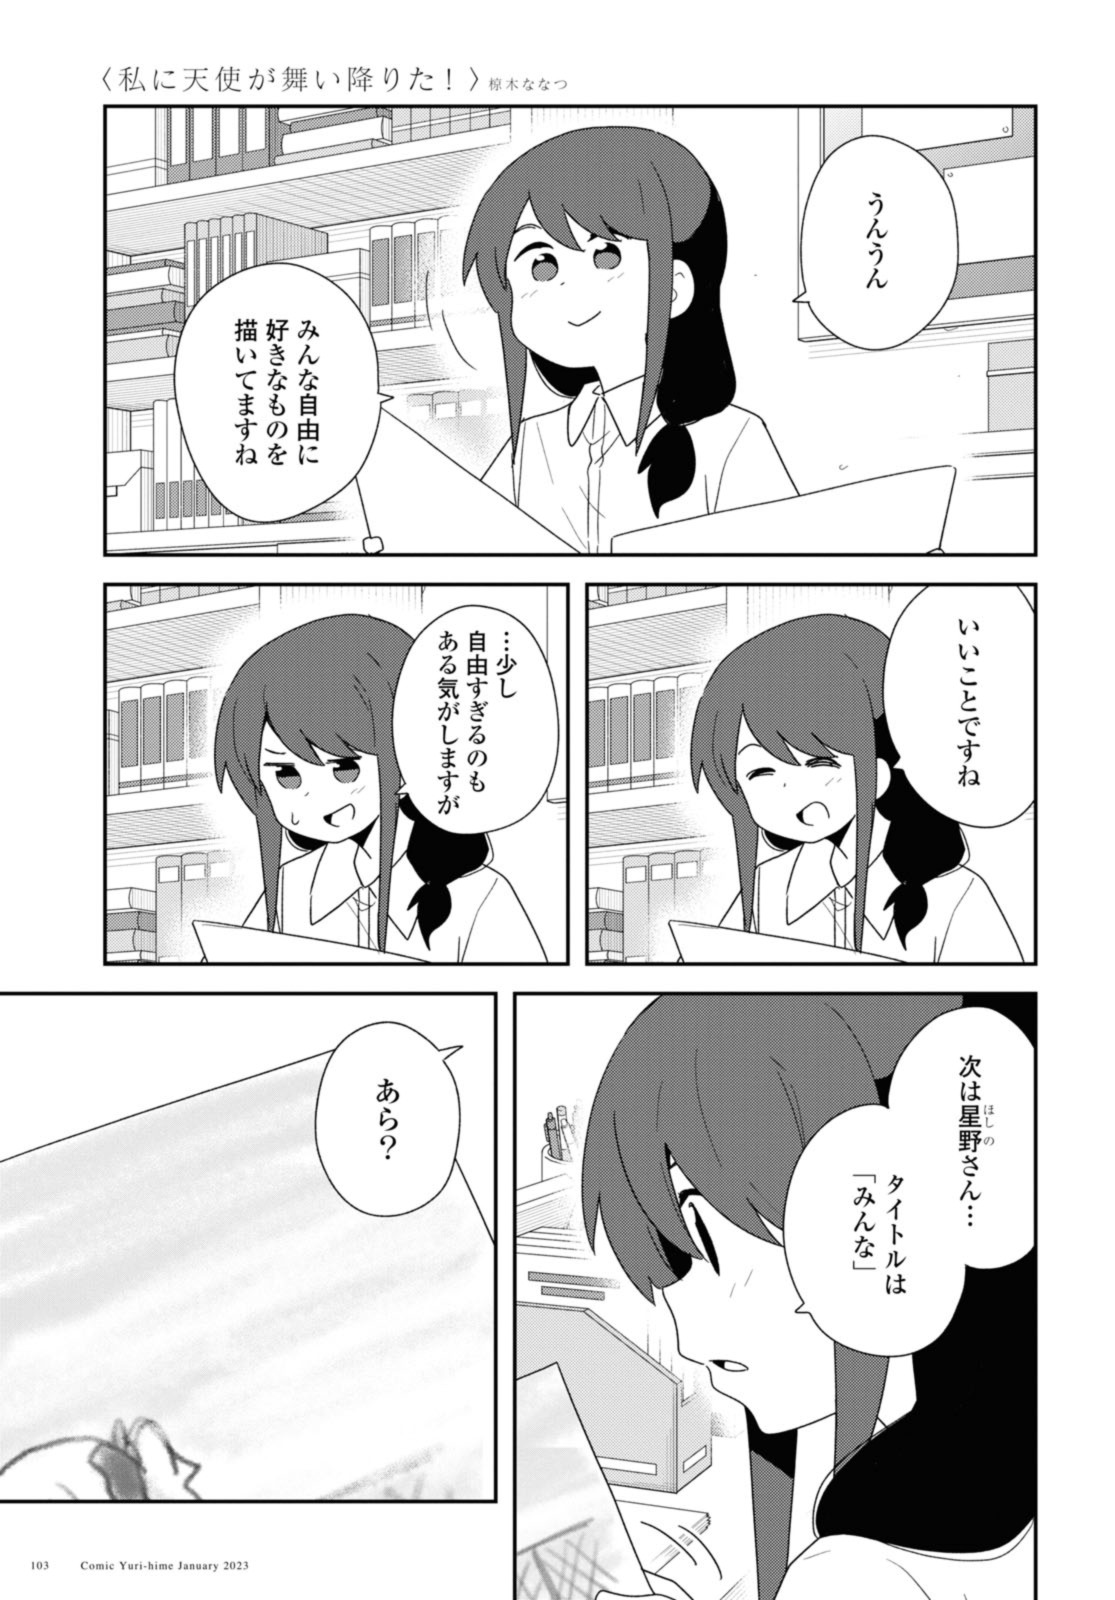 Wataten! An Angel Flew Down to Me 私に天使が舞い降りた！ 第101話 - Page 15